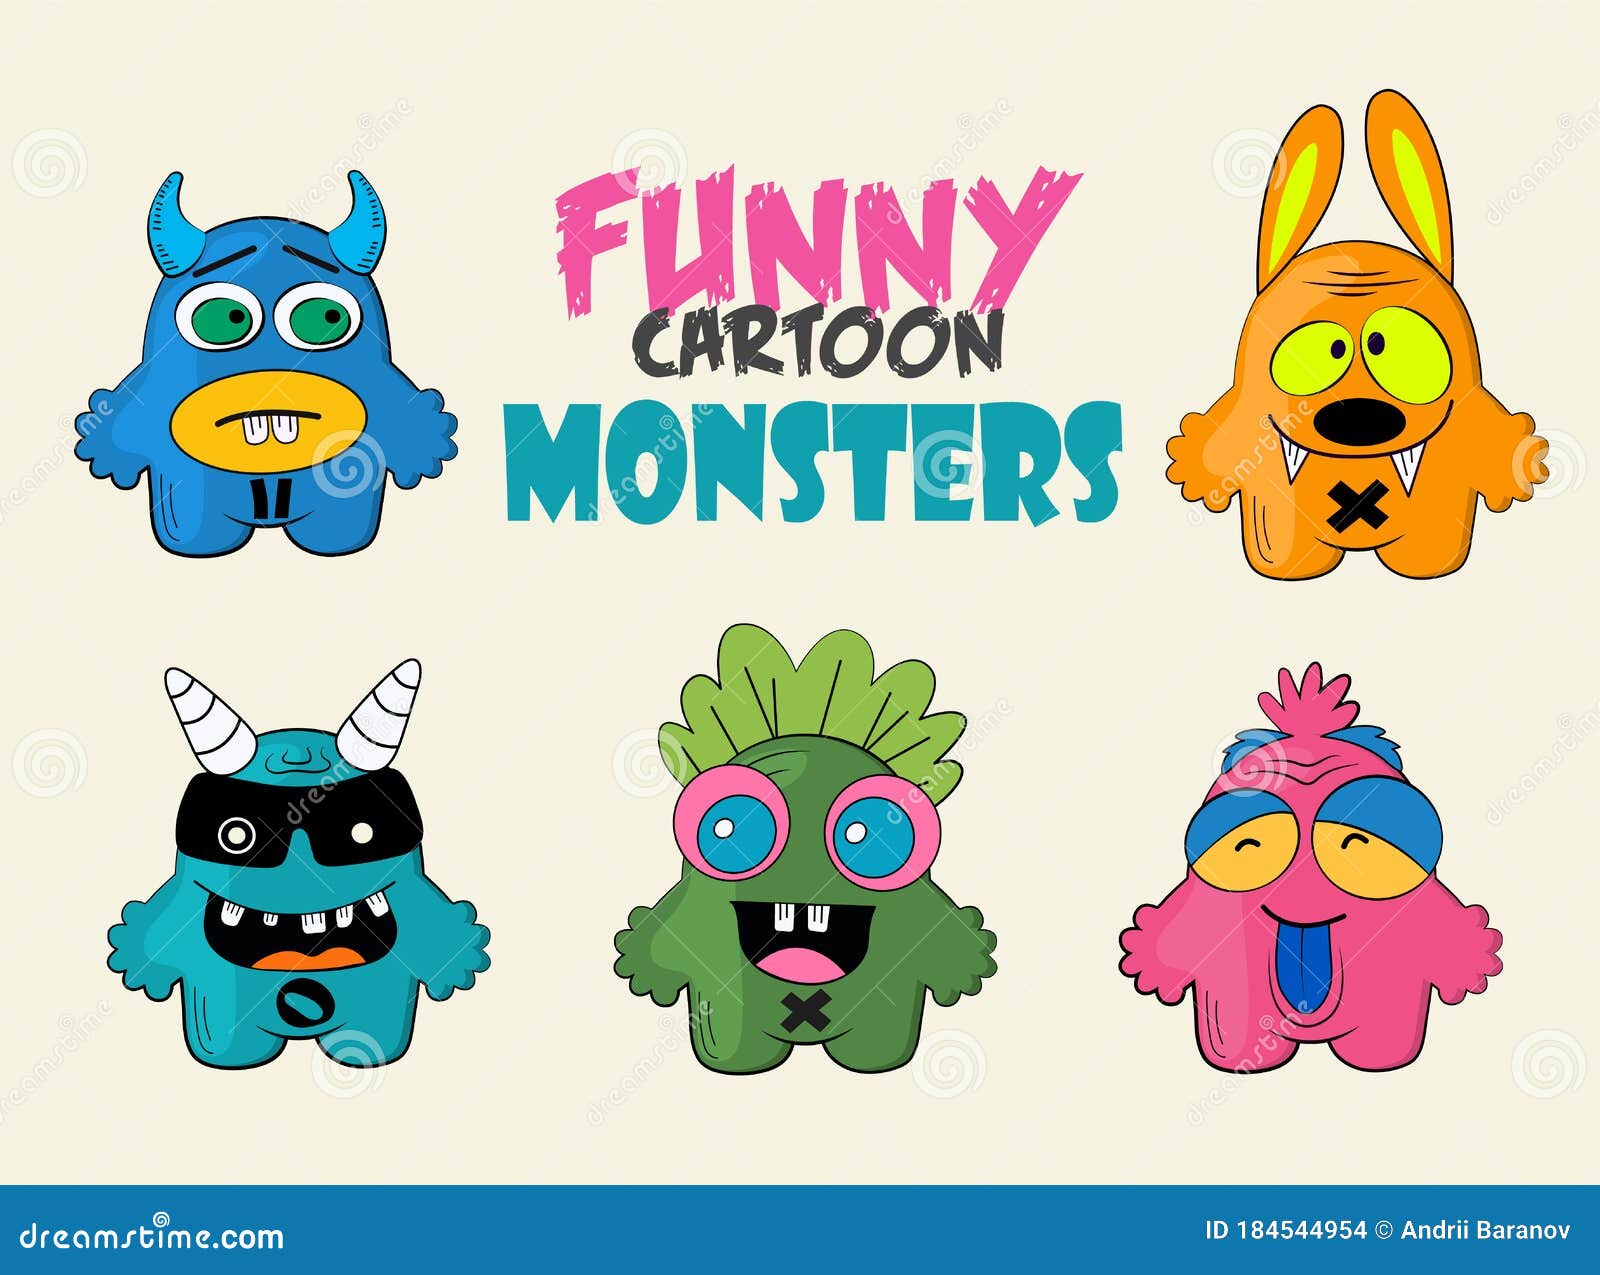 Funny Cartoon Colorful Monsters. Monsters with Emotions. Facial Expression.  Sad, Happy, Angry Faces Stock Vector - Illustration of creature, cool:  184544954